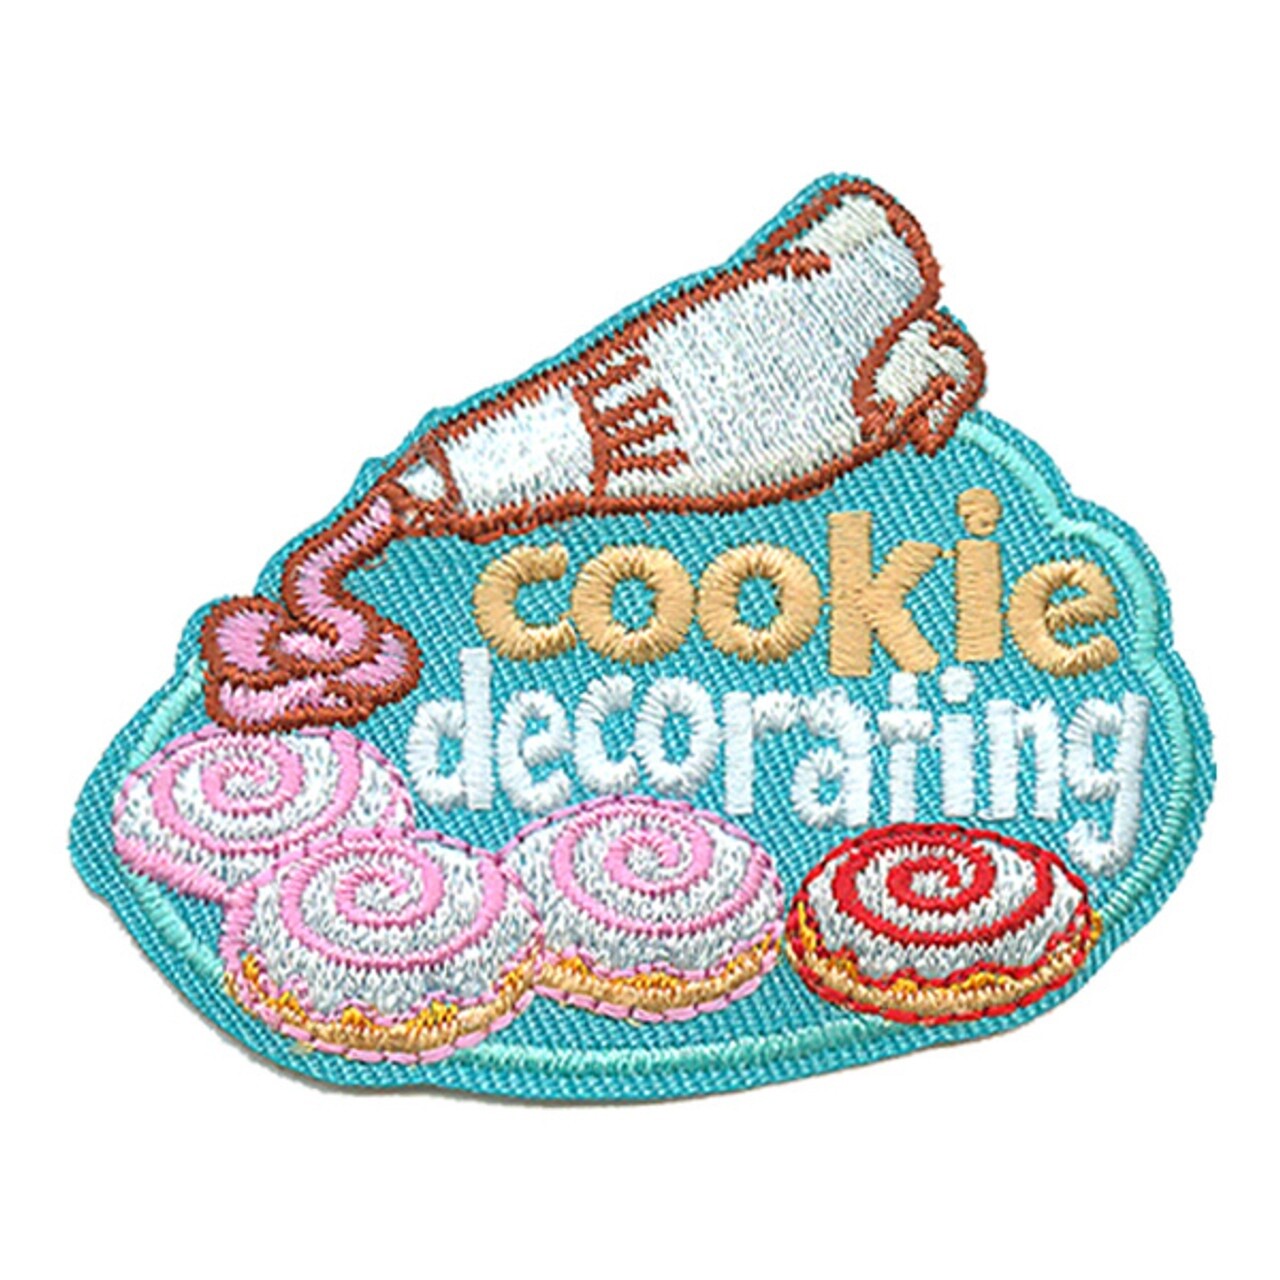 Cookie Decorating Patch